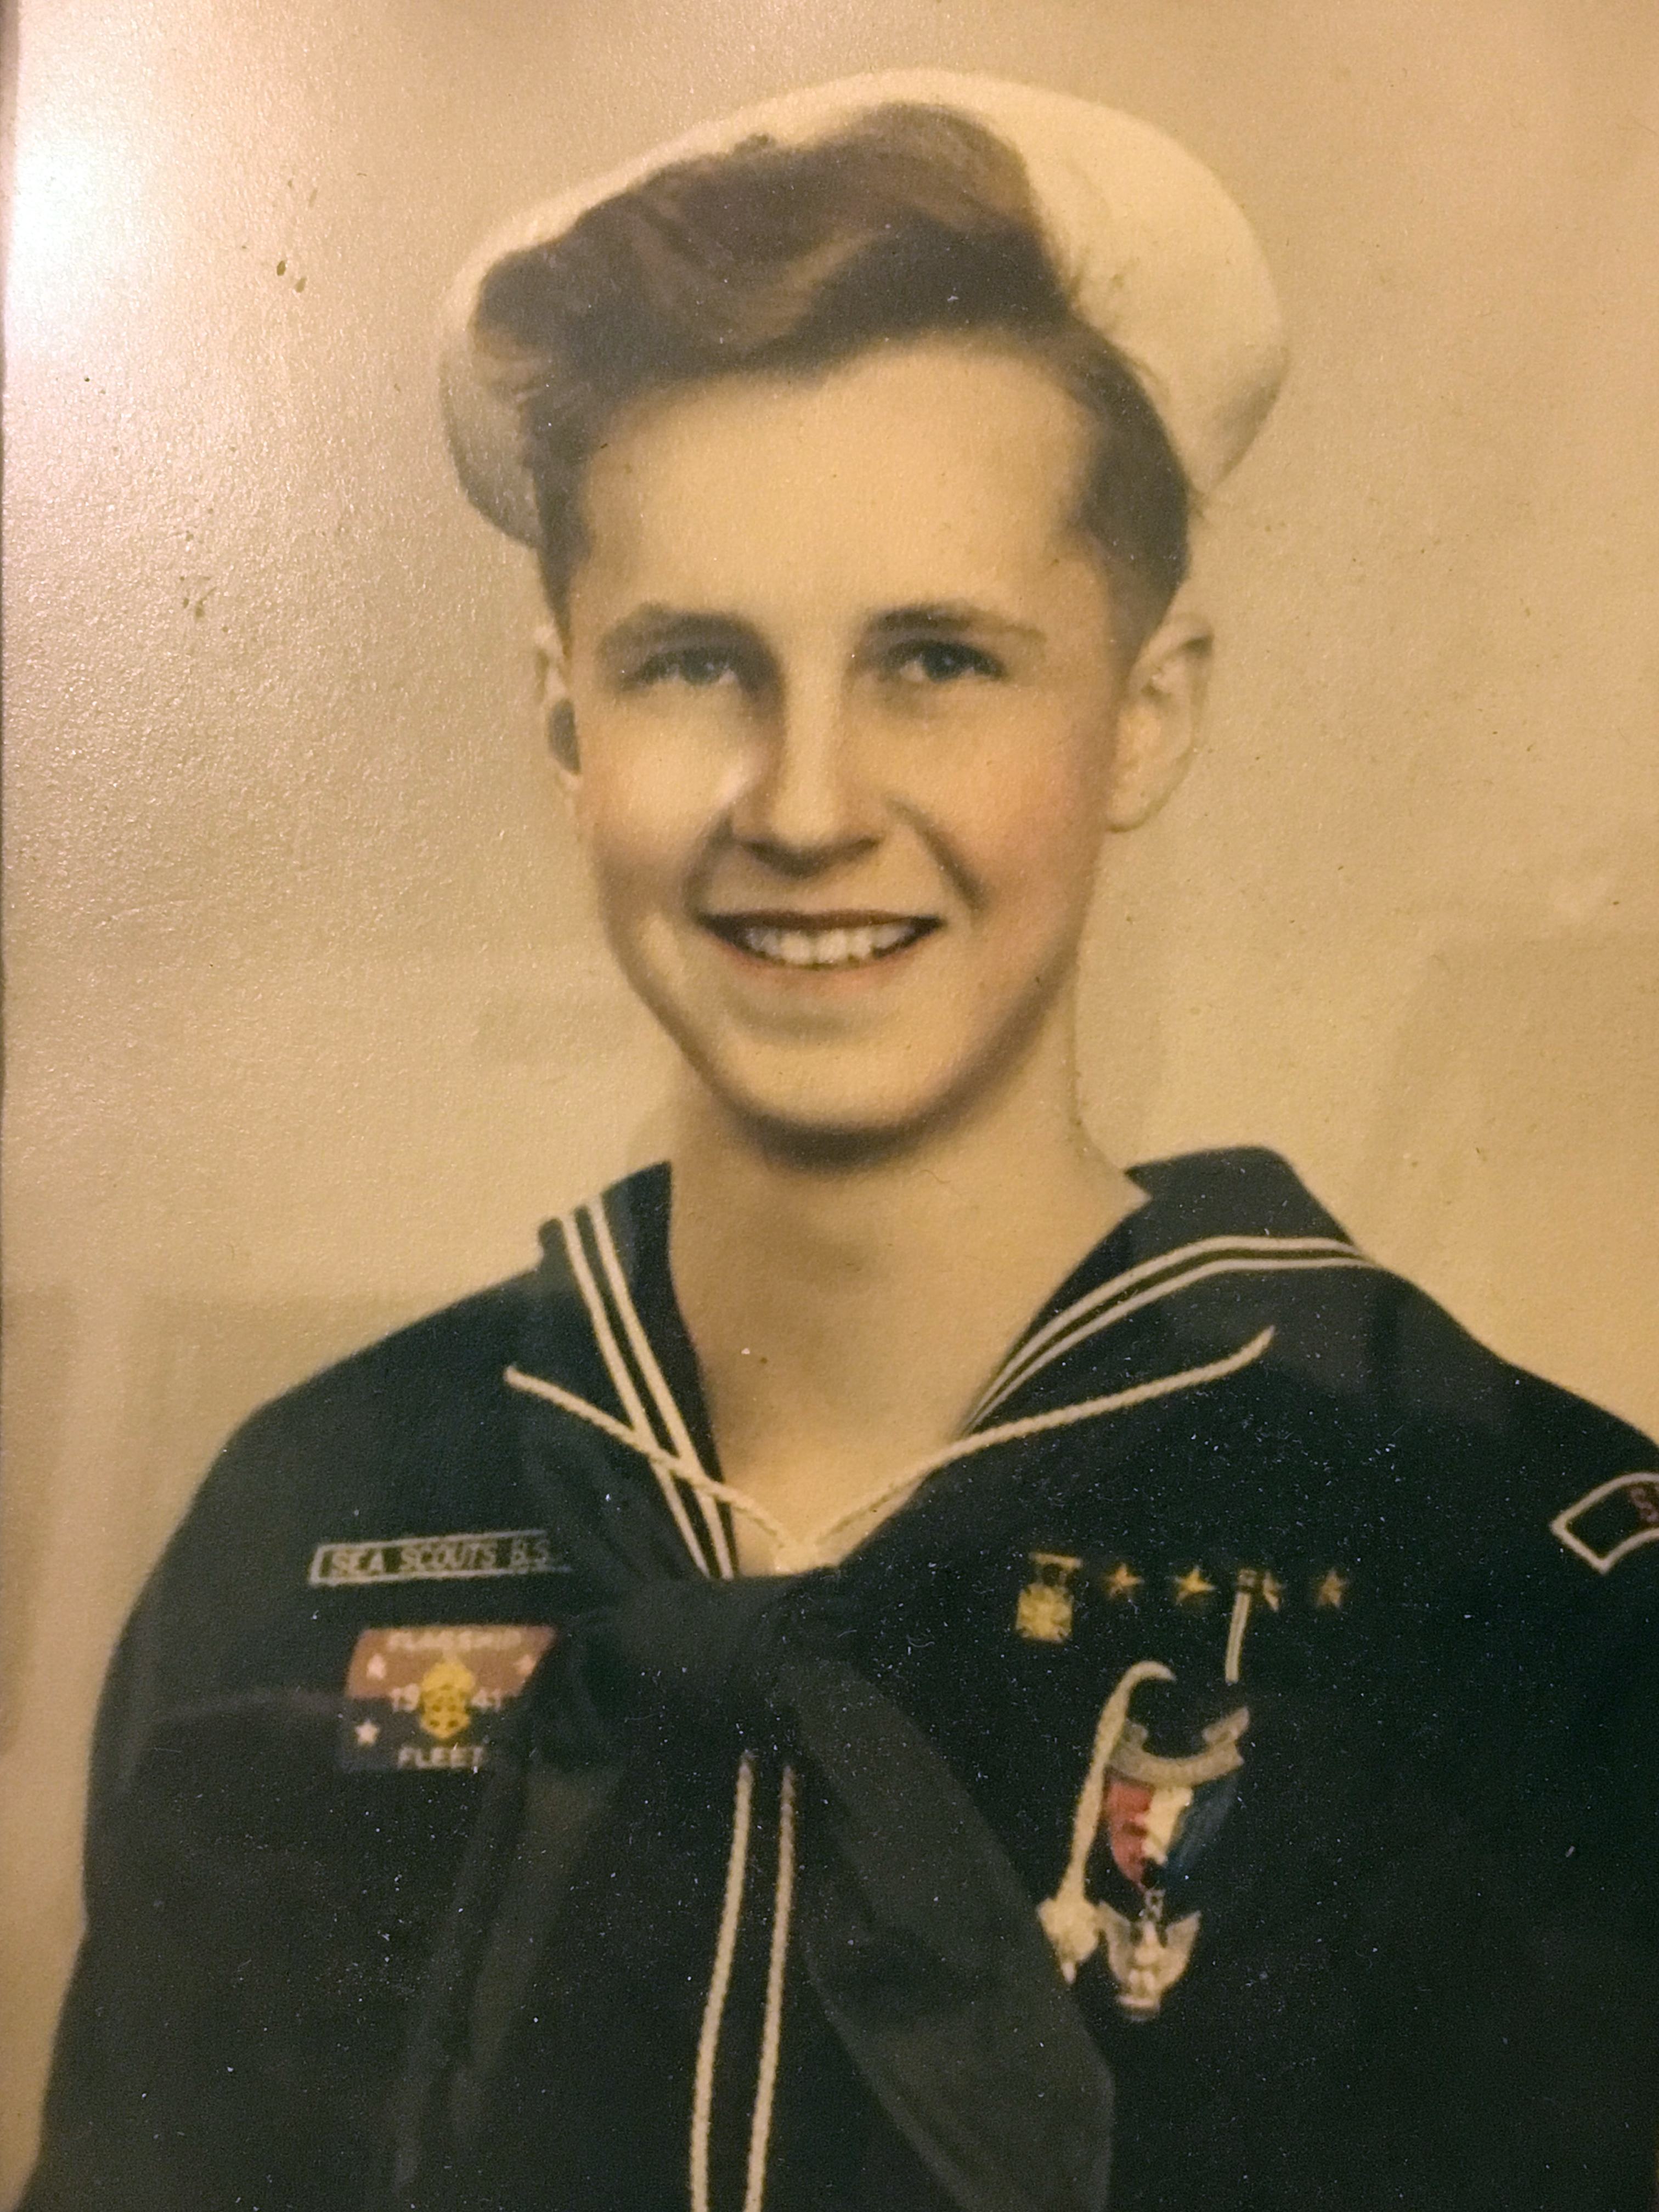 Rear Admiral Harley Nygren pictured as a Sea Scout when he was younger.